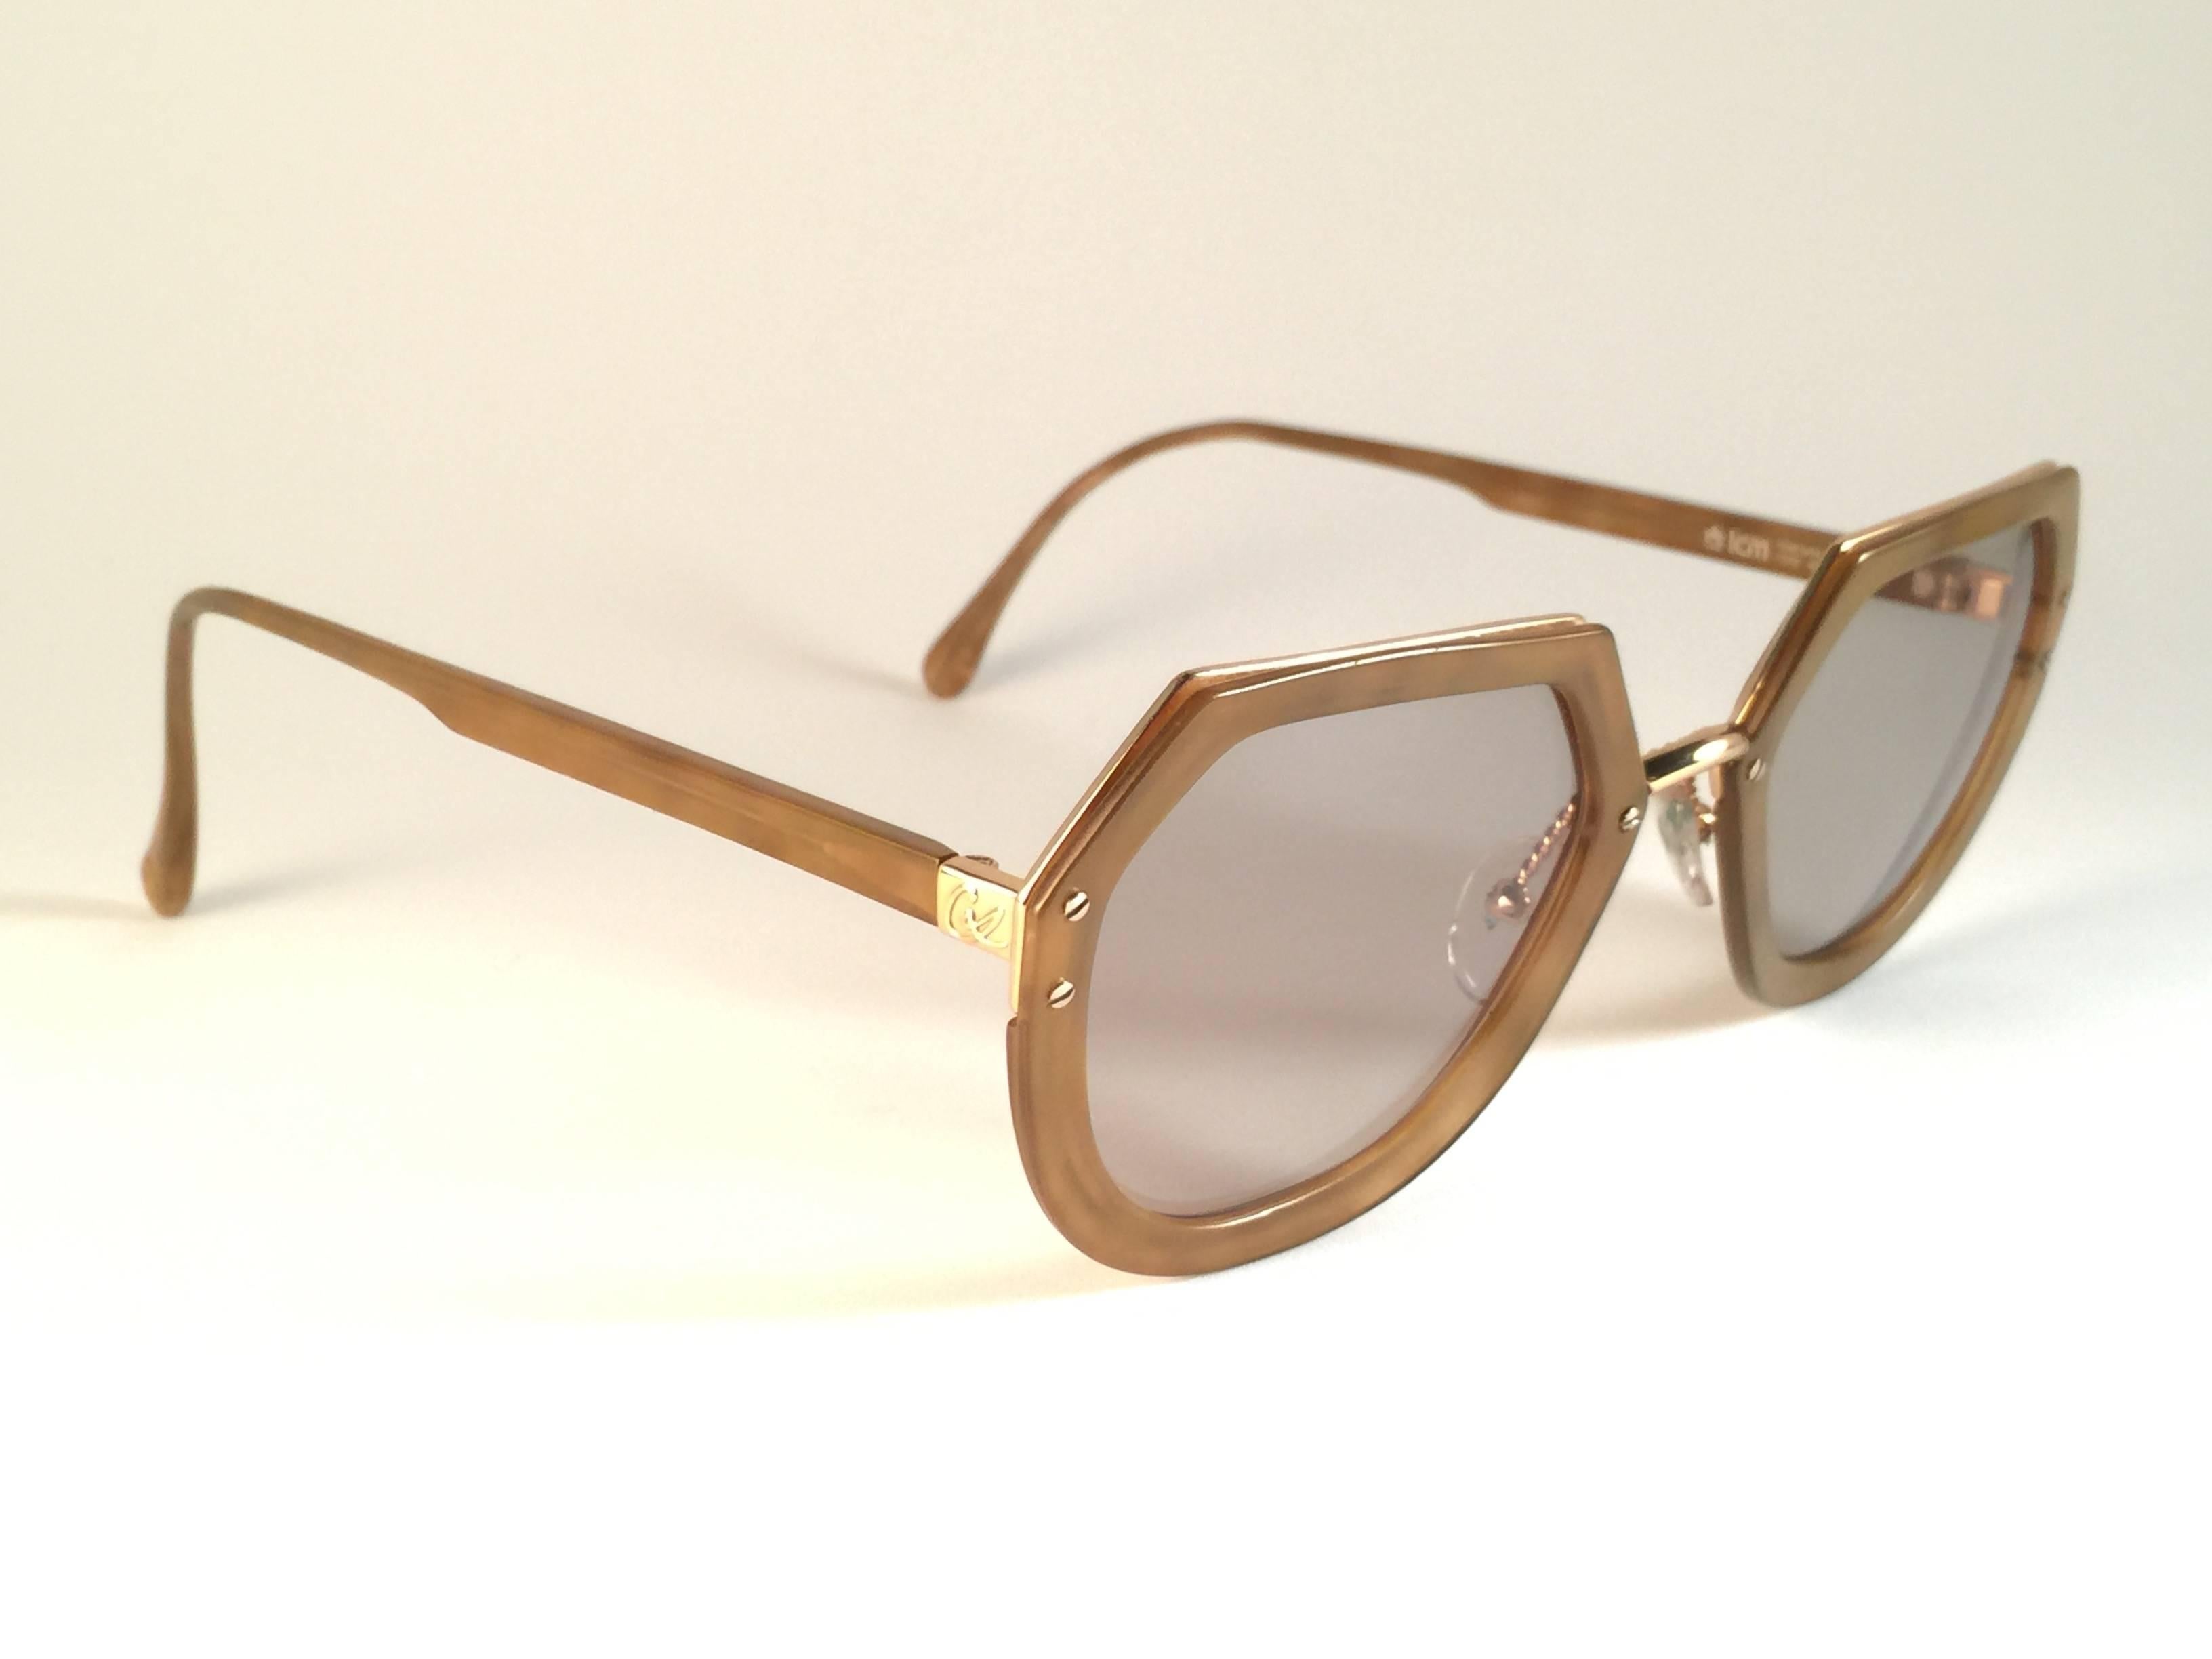 Superb & rare pair of New vintage Christian Lacroix sunglasses.   

Ocre with gold accents frame holding a pair of spotless amber lenses.   

New, never worn or displayed. This pair may have minor sign of wear due to storage.

Made in France.